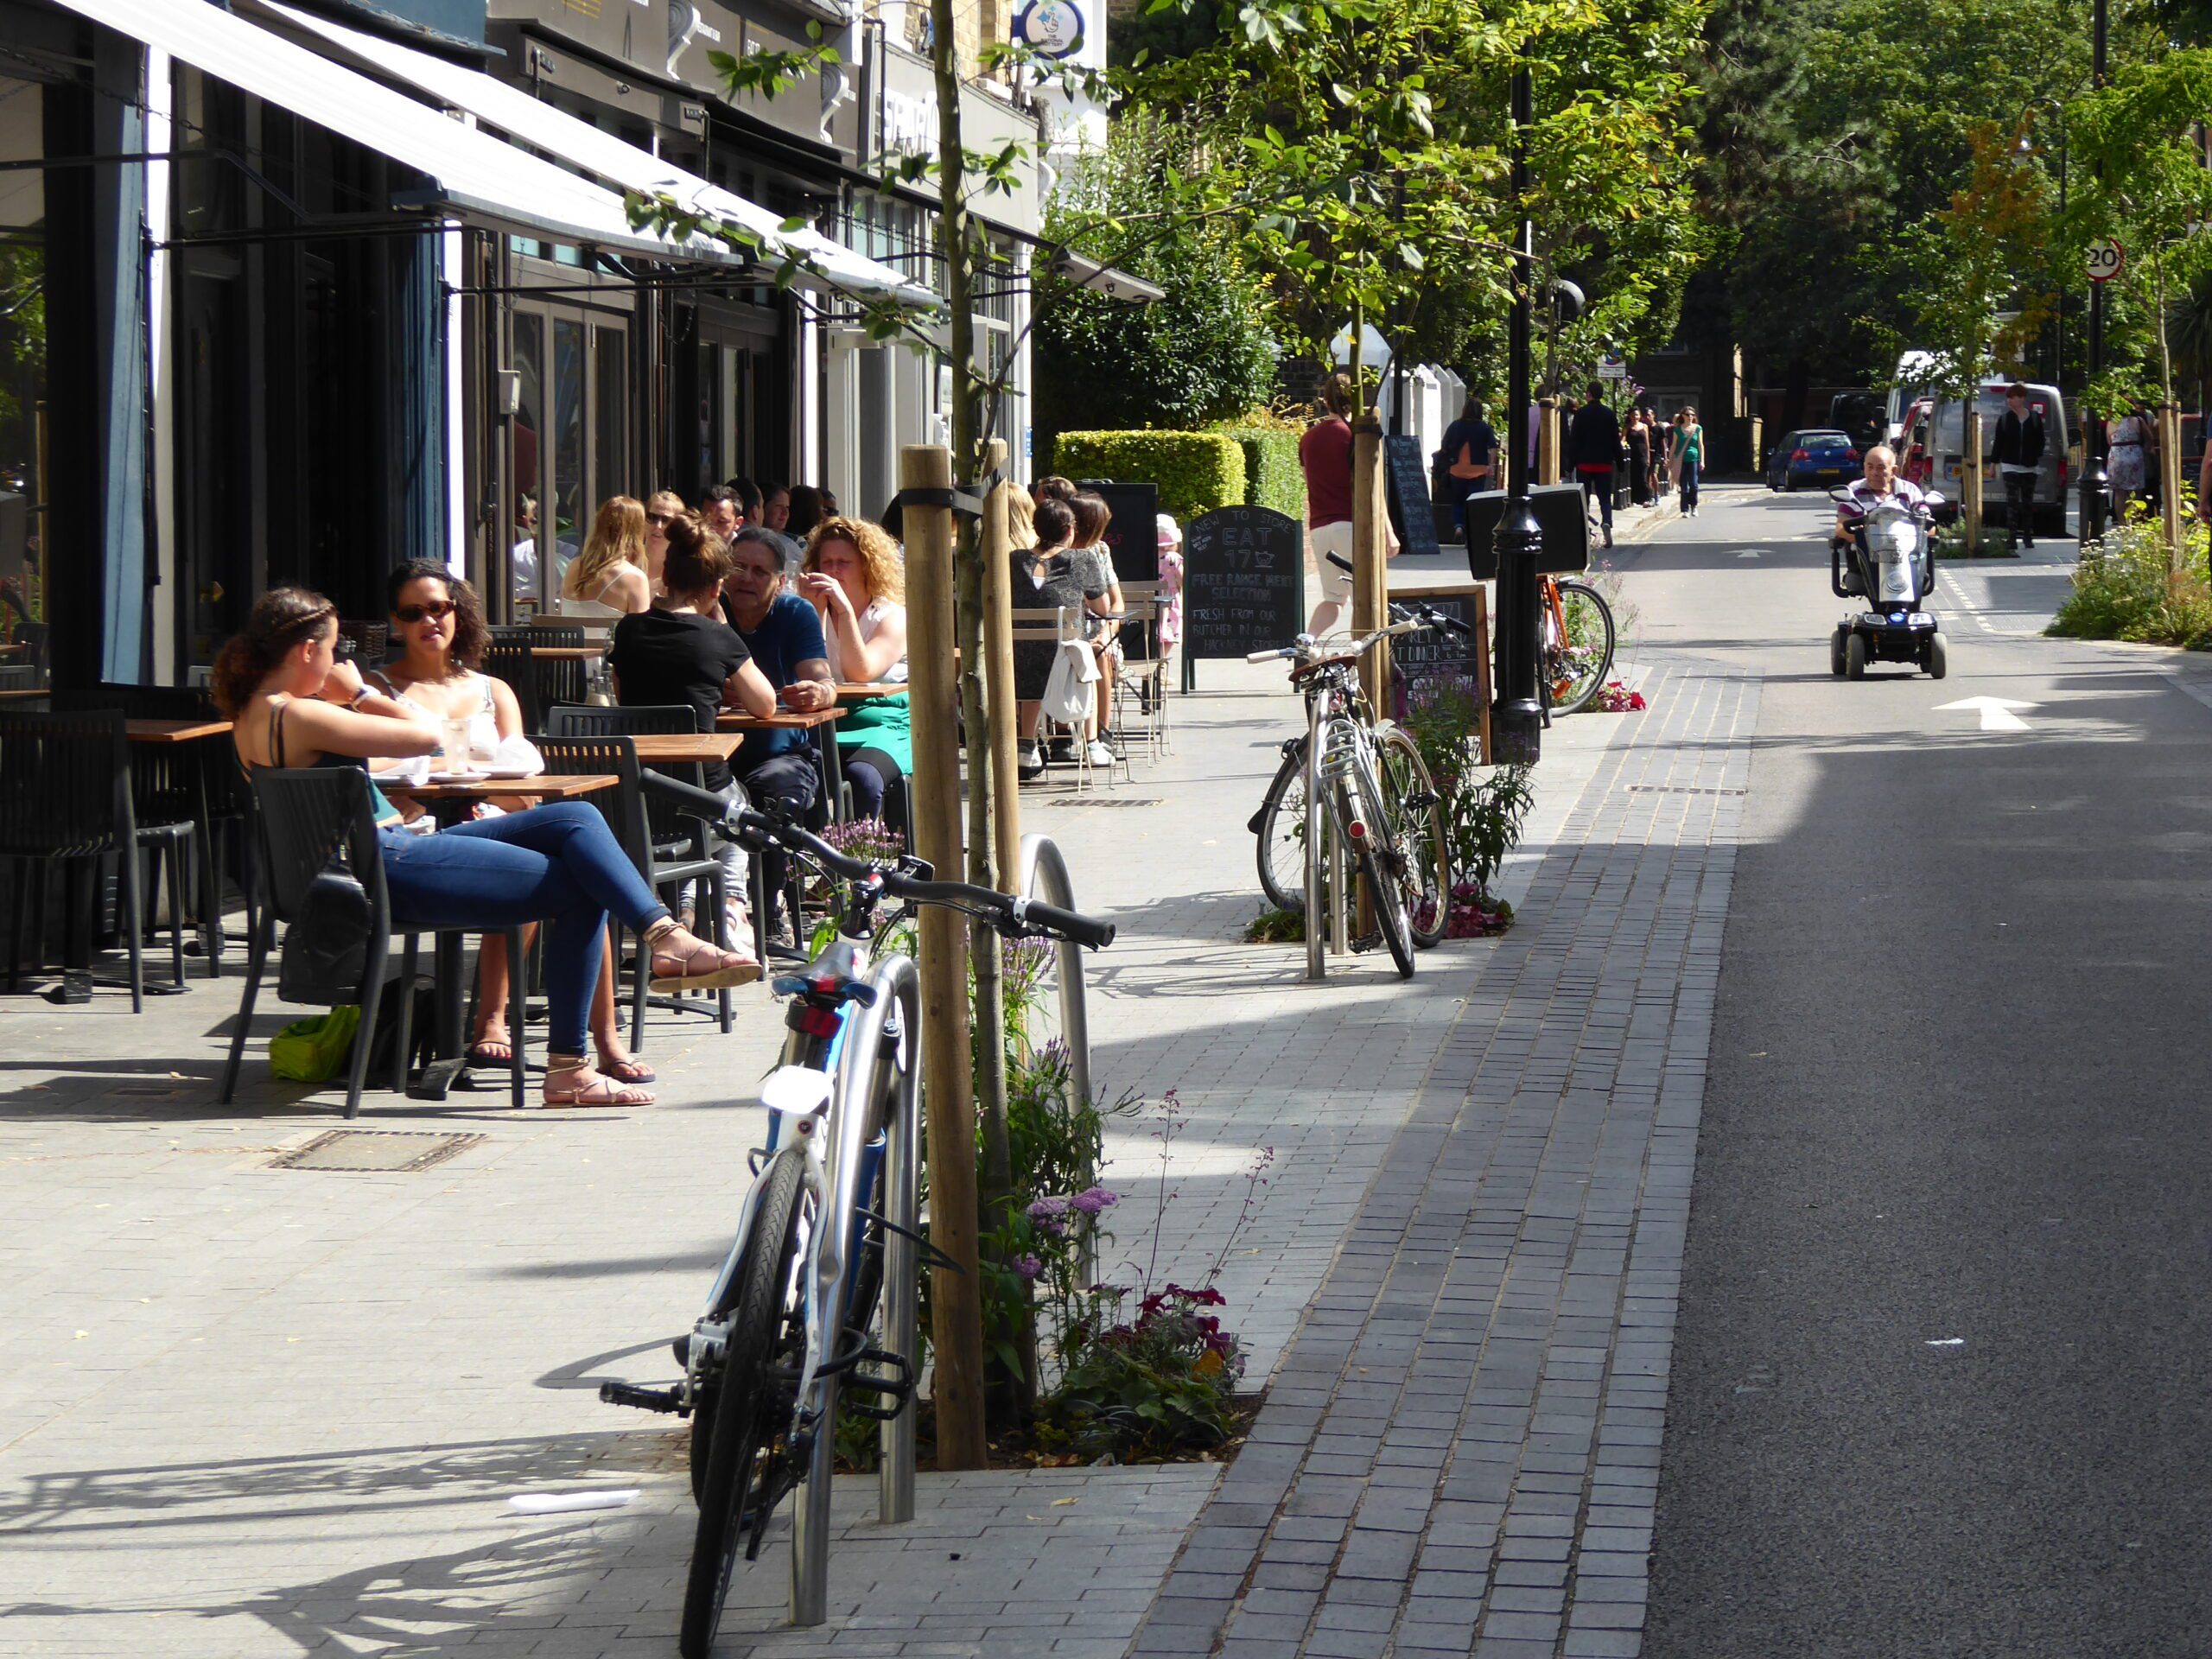 people sitting outside shops and cafes on a stepfree, broad footpath urban street with bikes parked